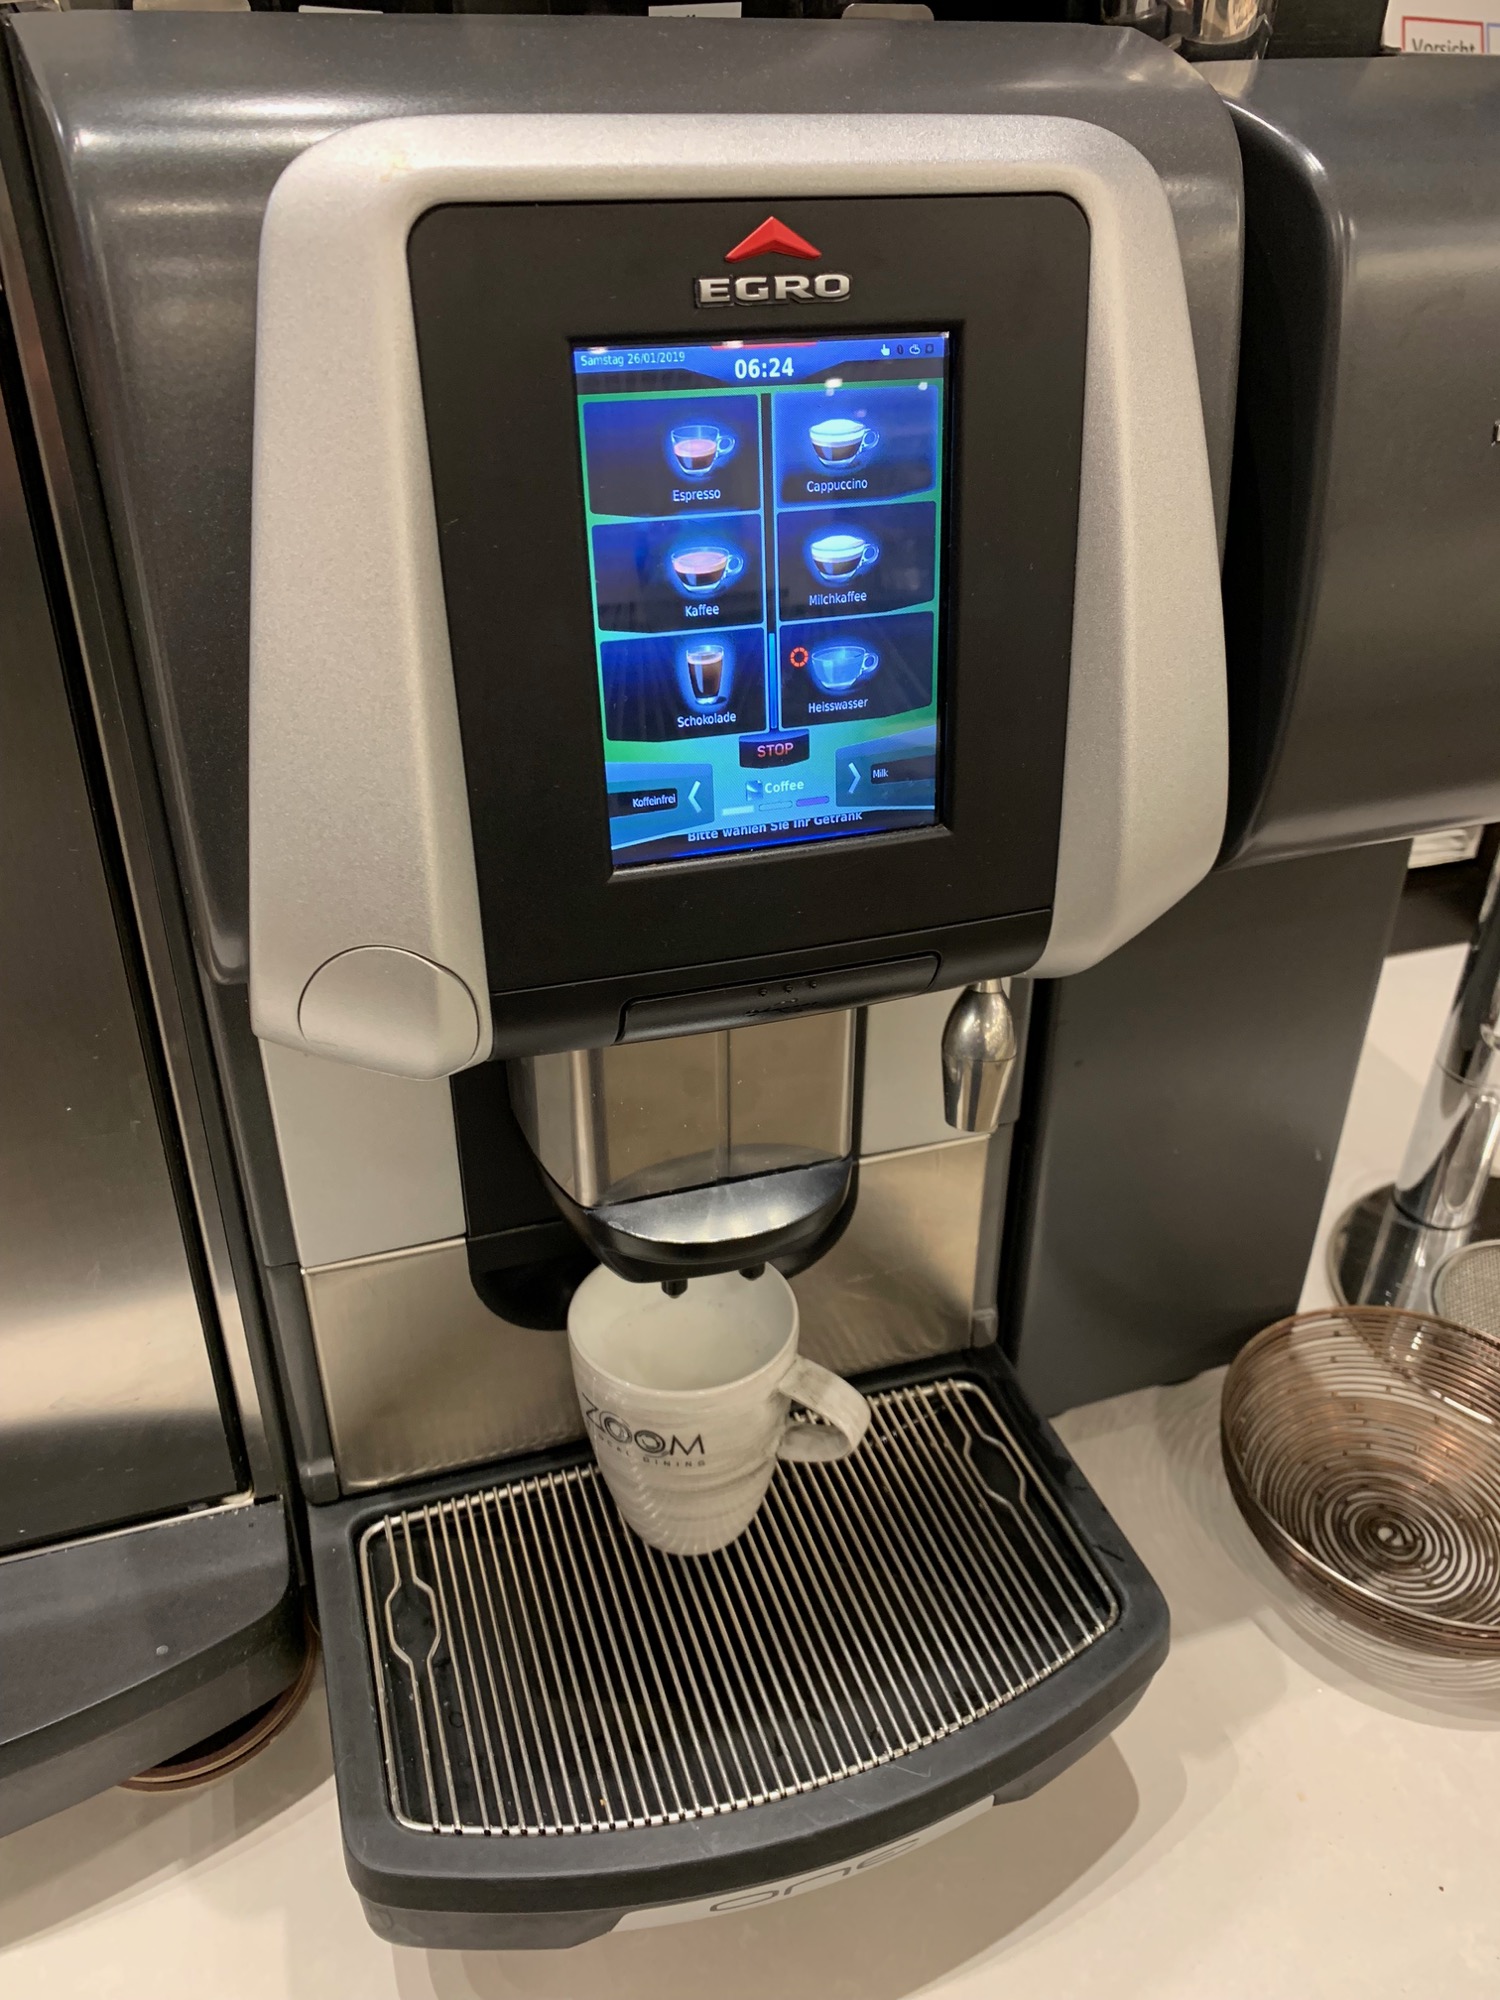 a coffee machine with a screen